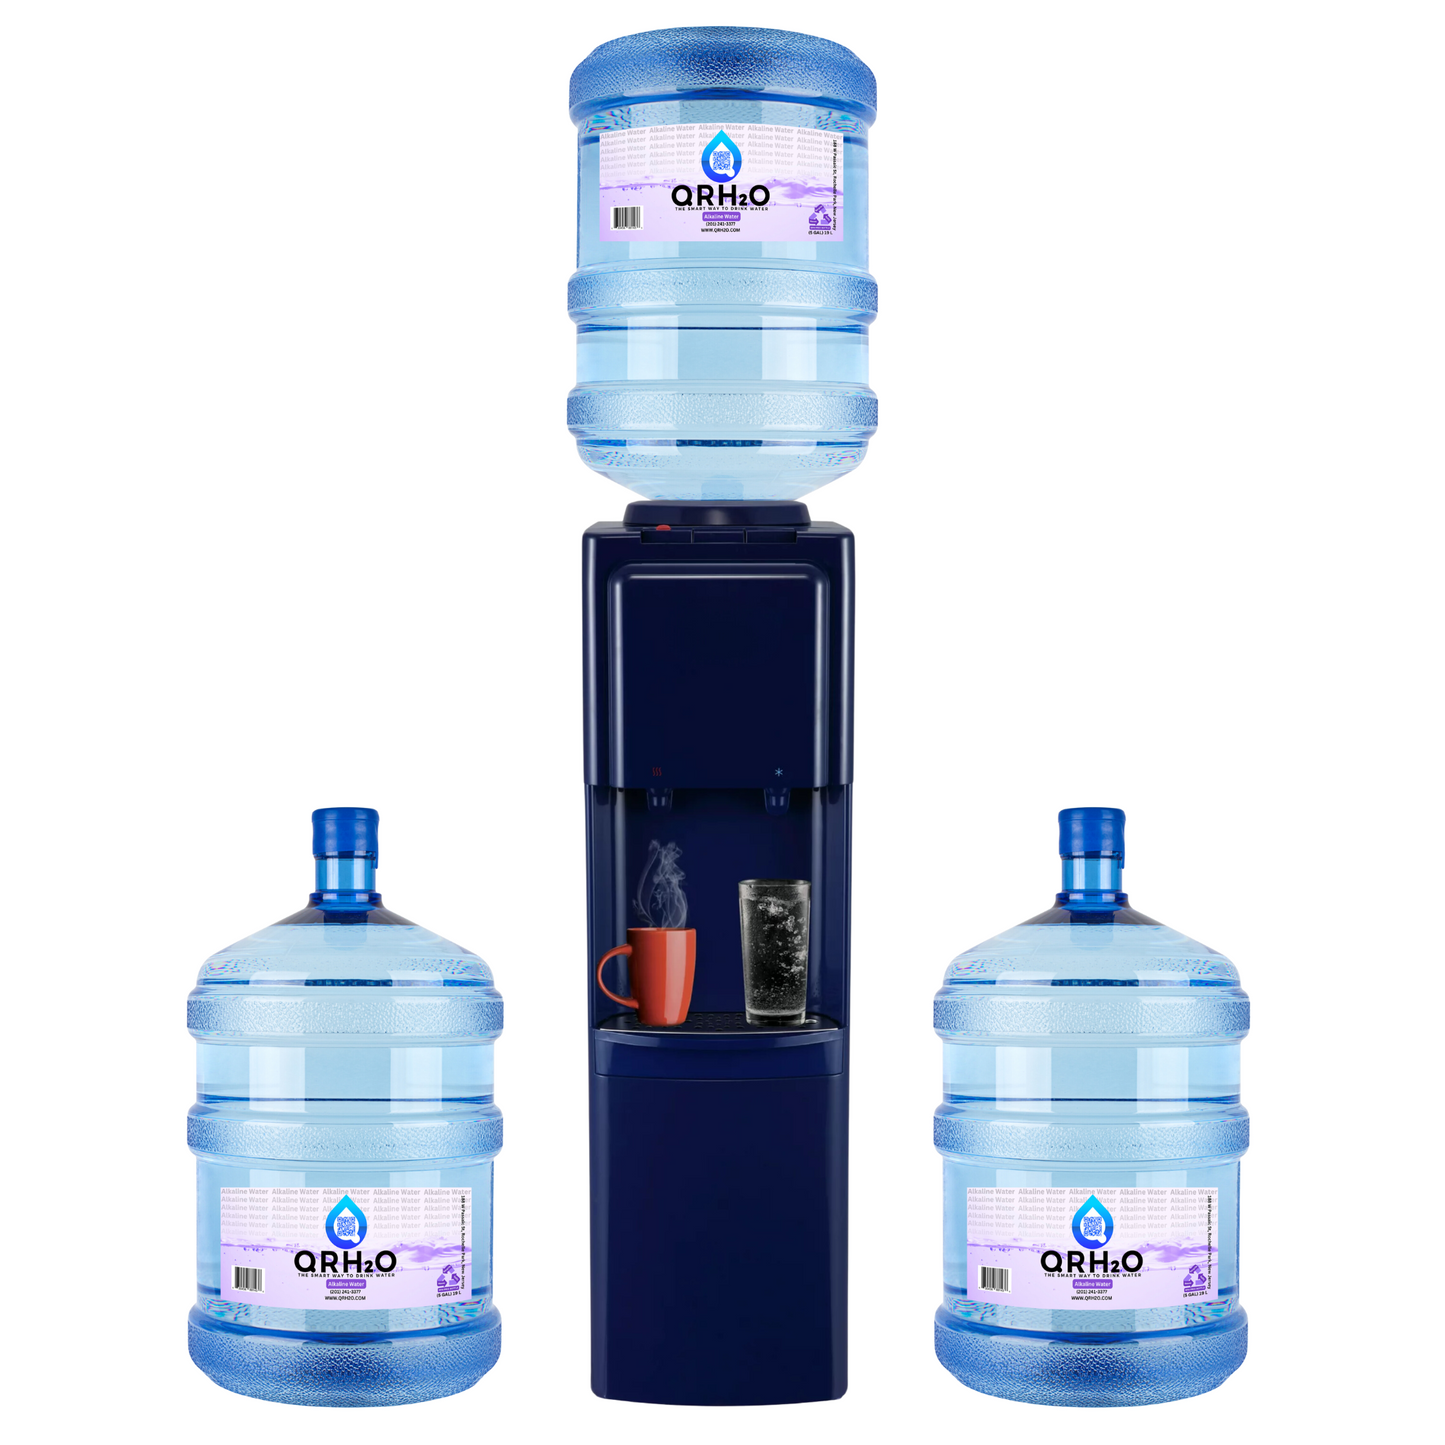 Experience pure and refreshing hydration with 3 of our 5-gallon bottles, featuring your choice of purified or alkaline water, and a stylish top-loading hot and cold dispenser from the trusted brand Primo.